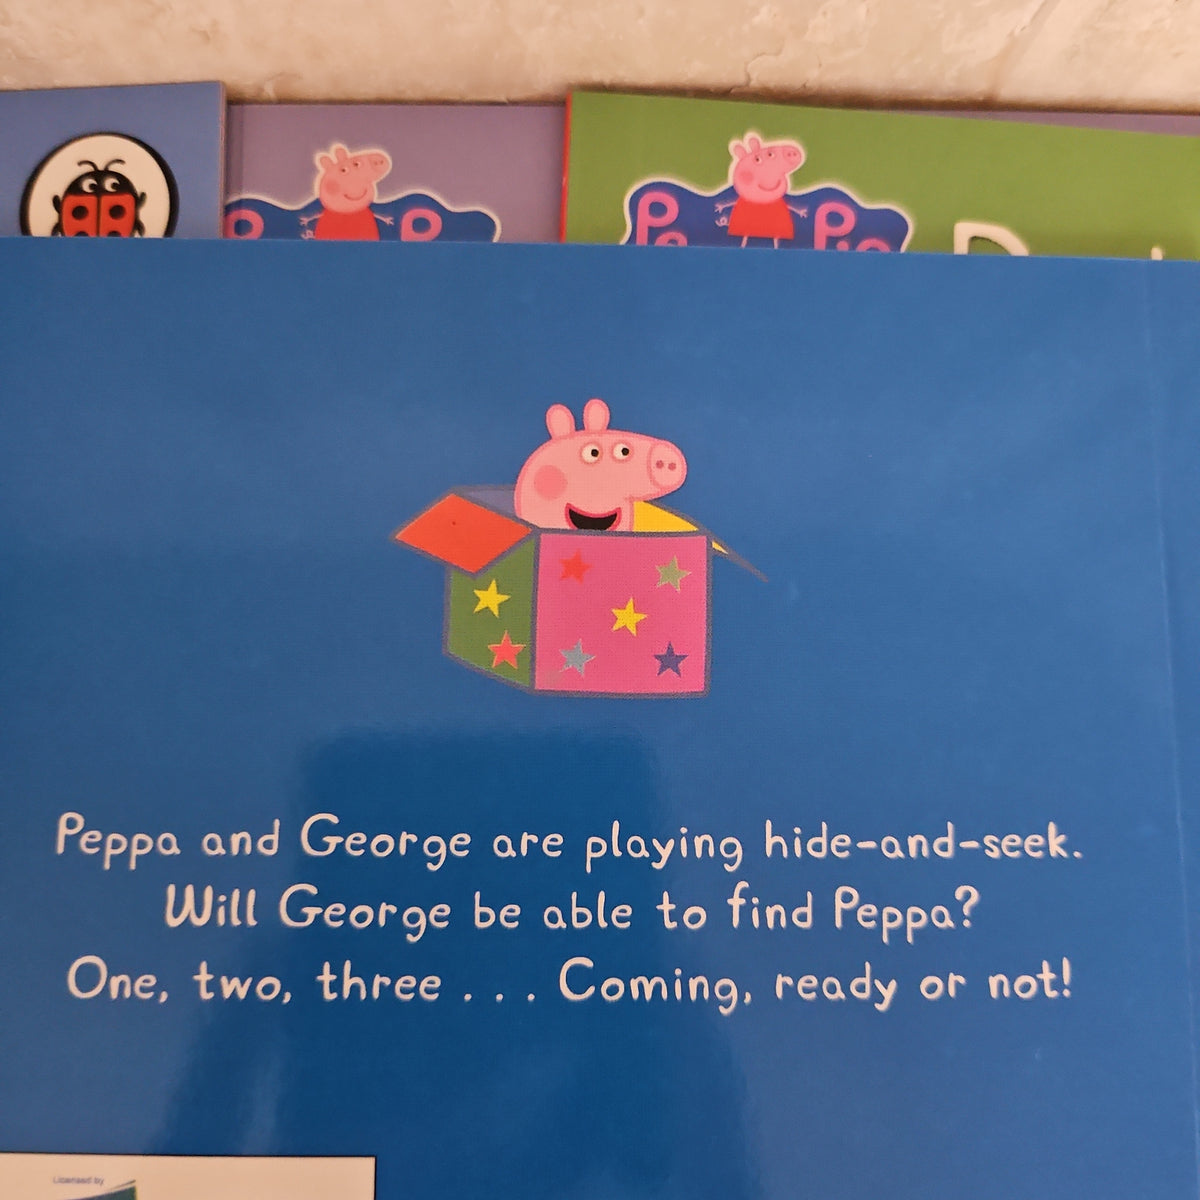 The Amazing Peppa Pig Collection:Hide and Seek